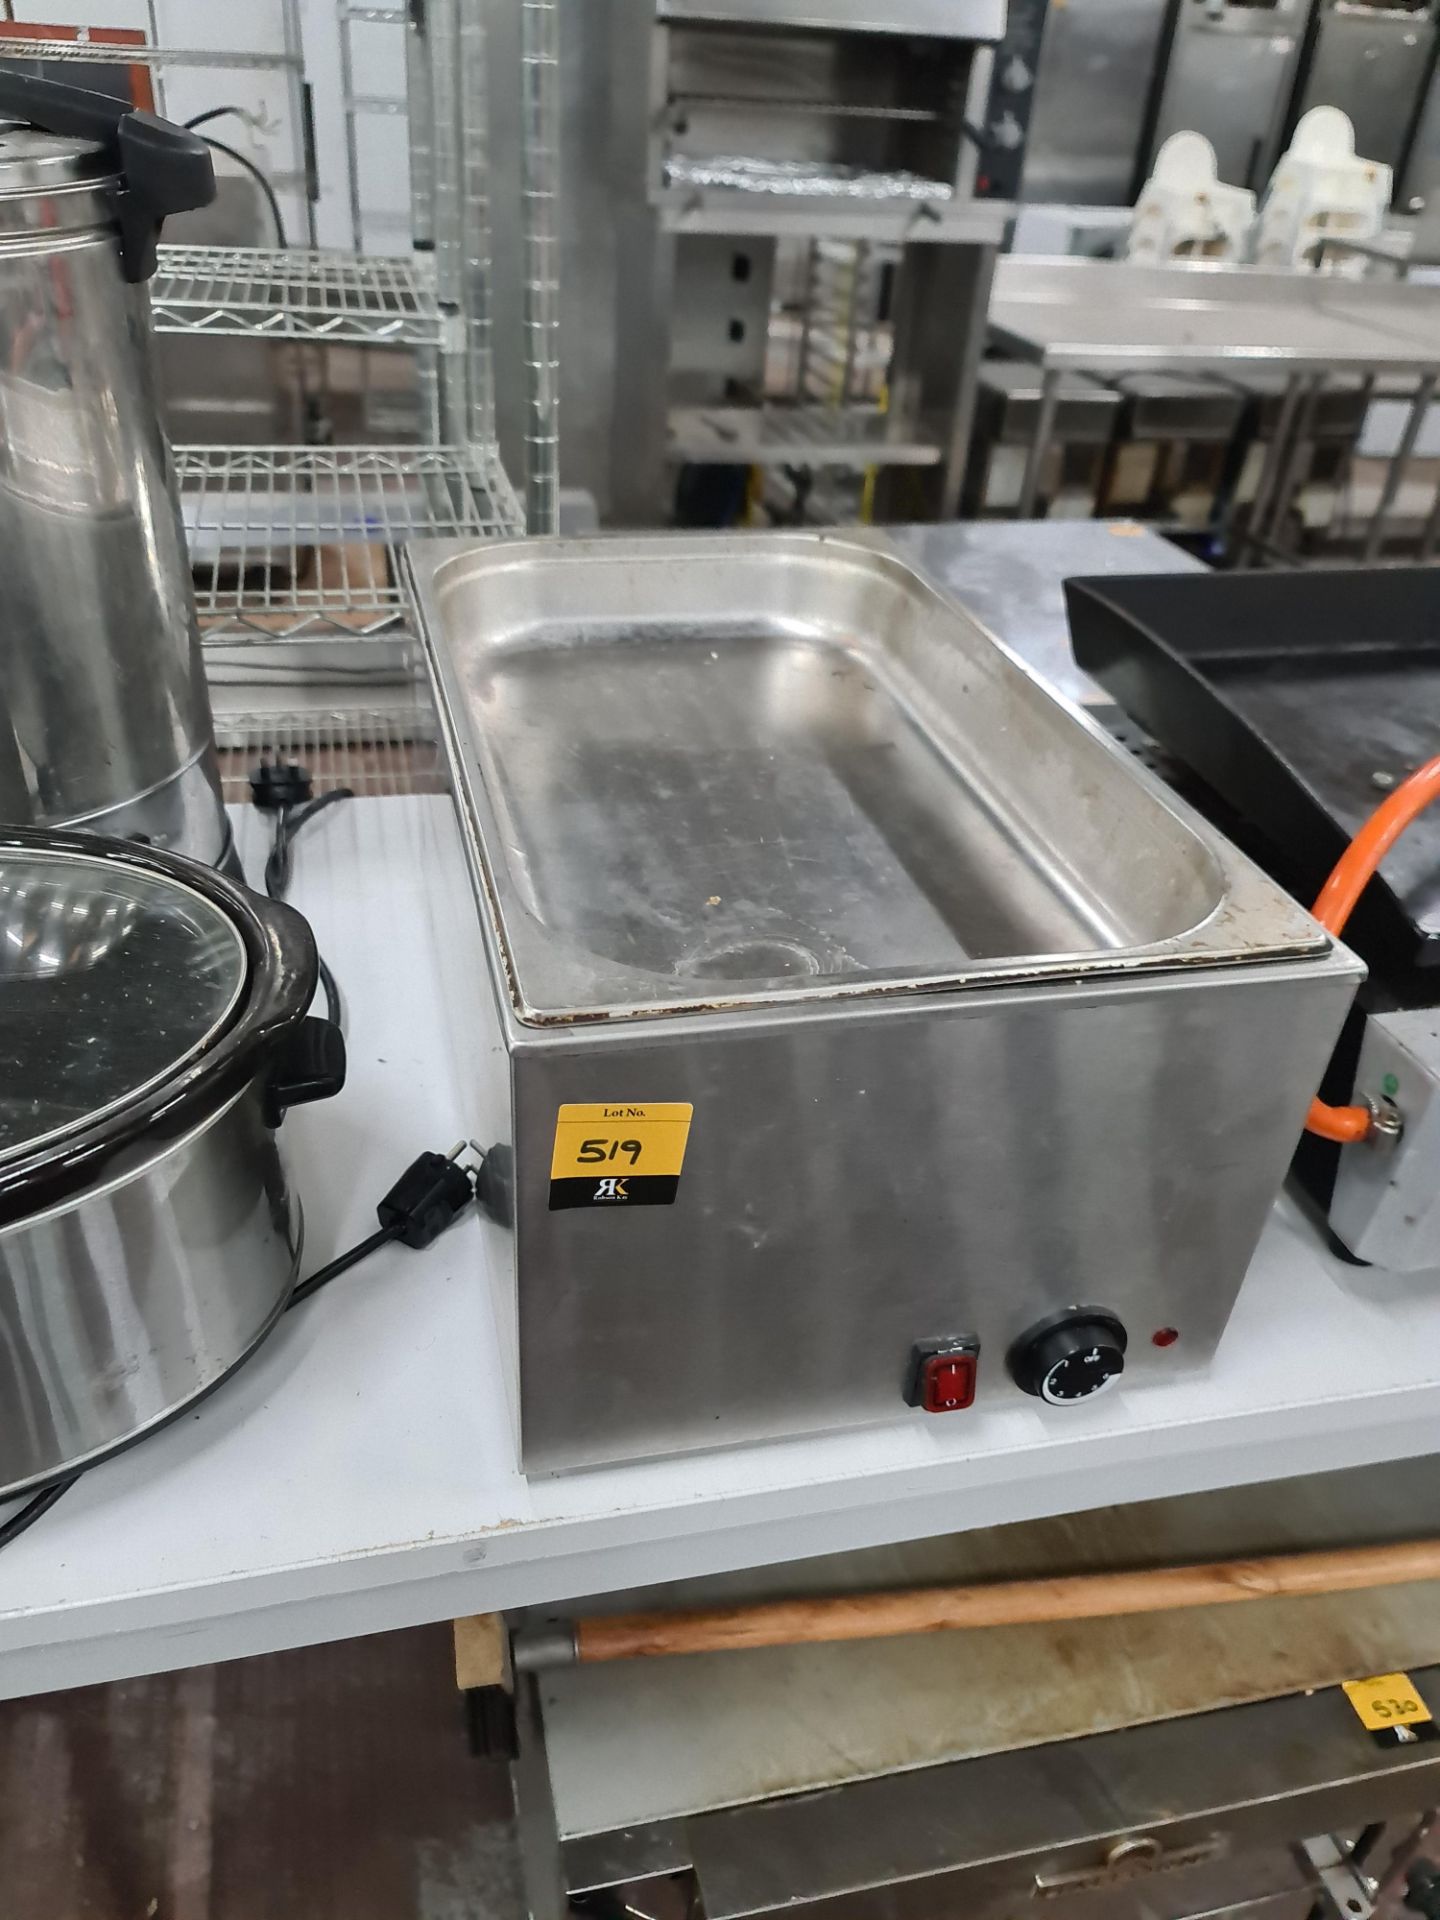 Bench top stainless steel bain marie/warming unit